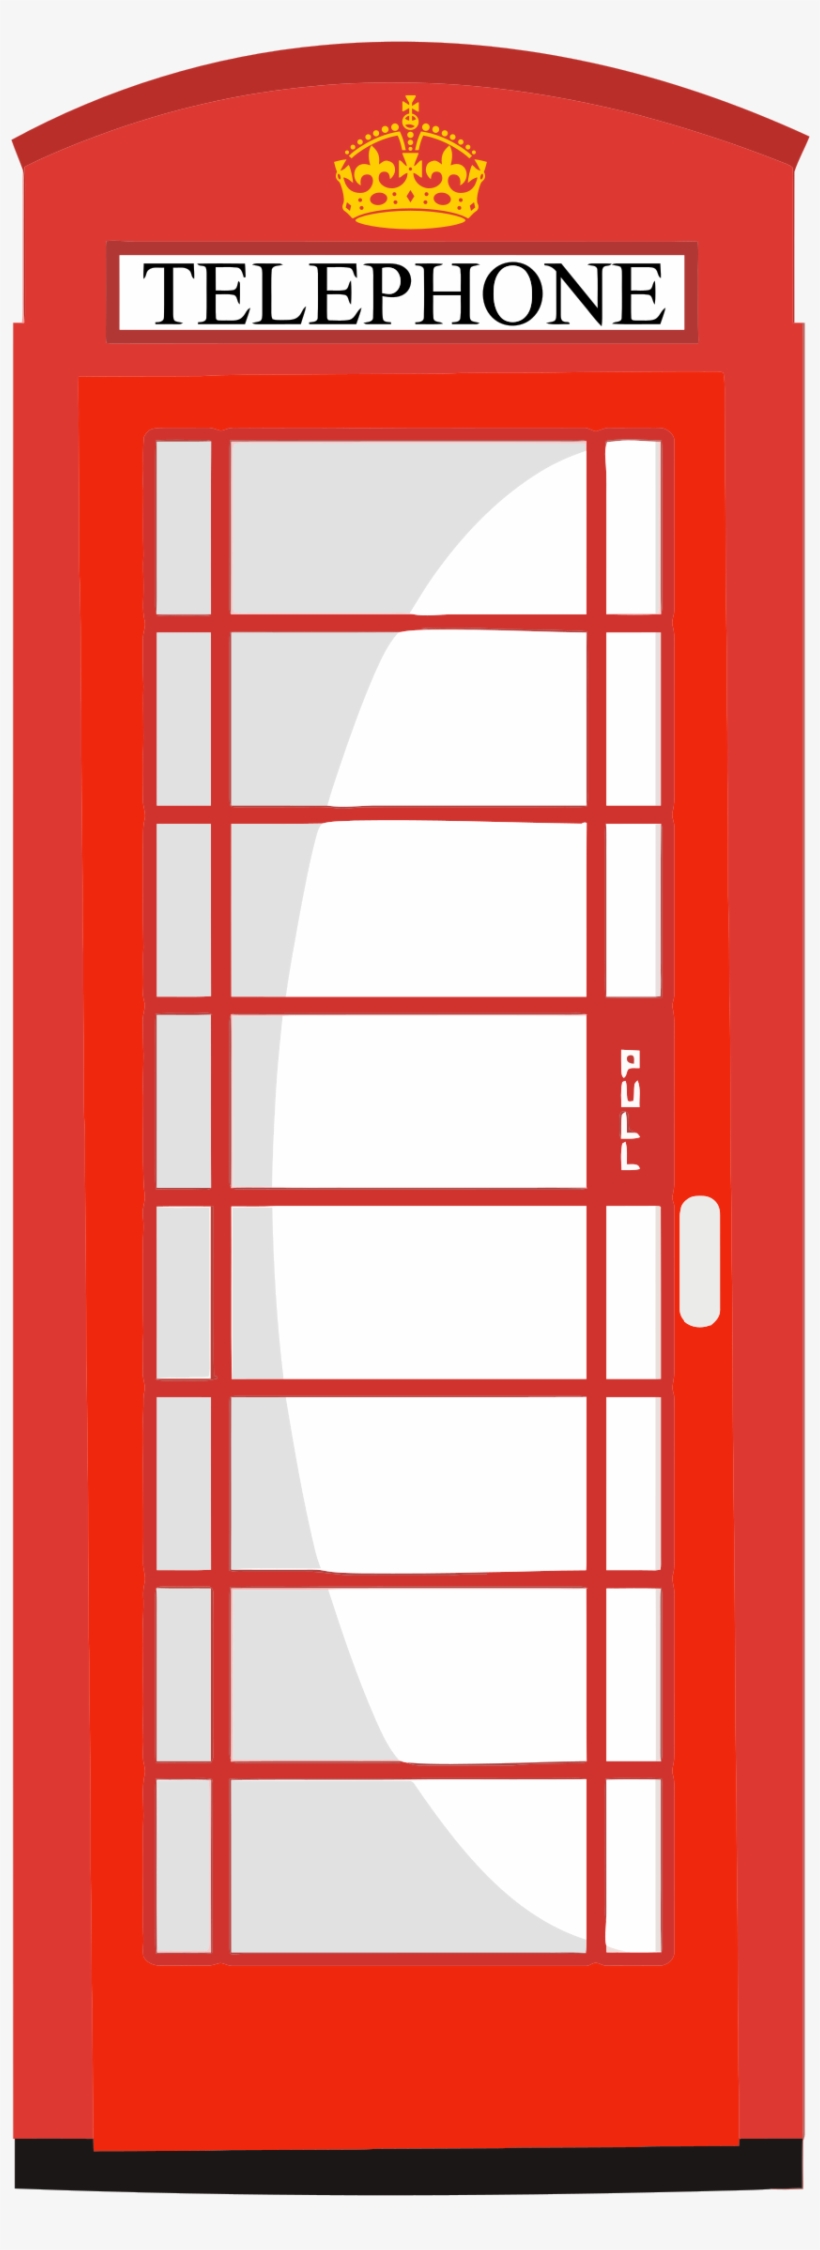 This Free Icons Png Design Of Red Telephone Box, transparent png #1174612